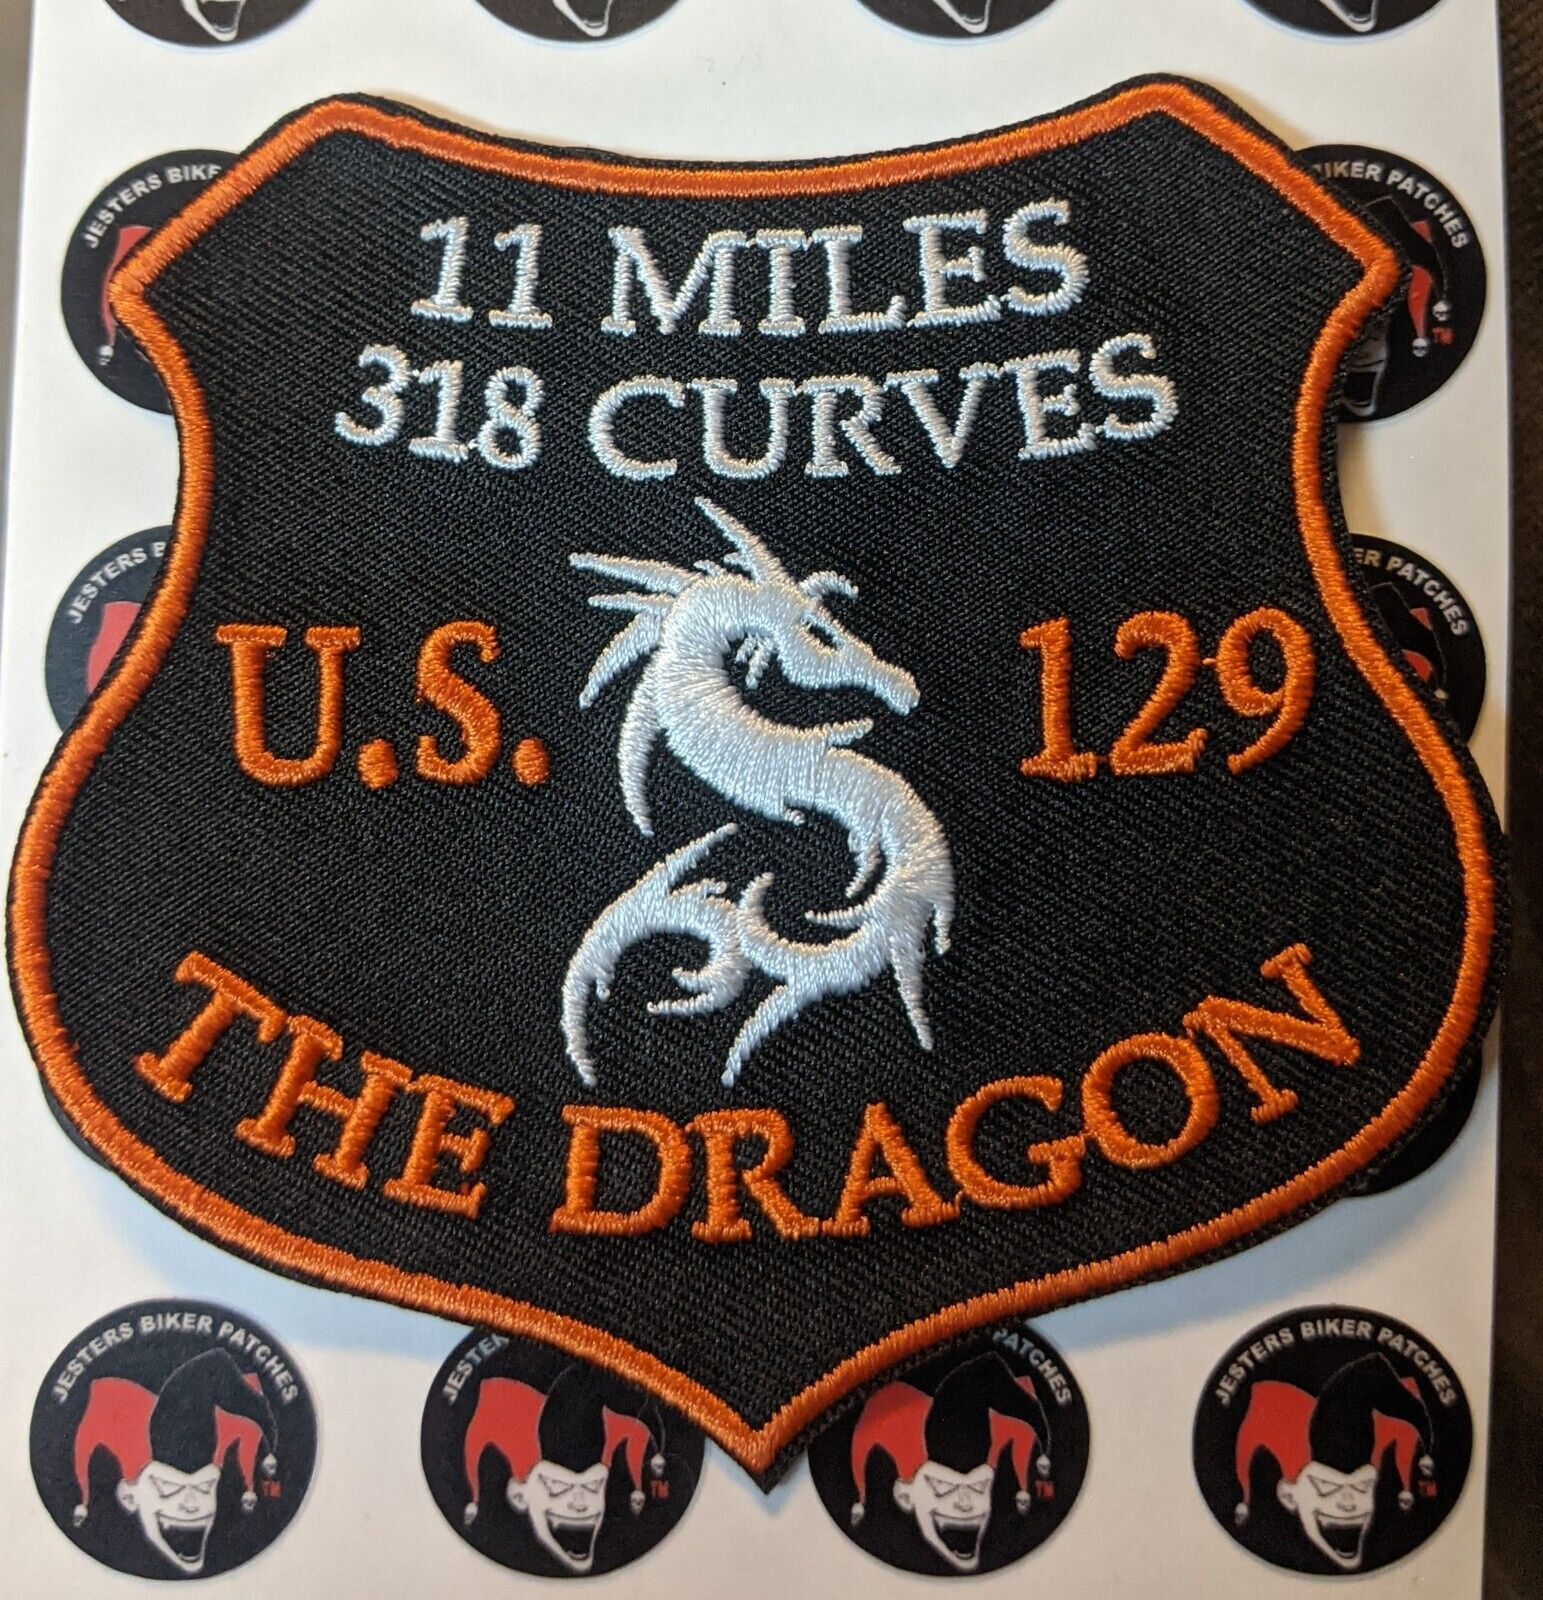 US Highway 129 Tail of the Dragon 11 Miles / 318 Curves  Embroidered Biker Patch